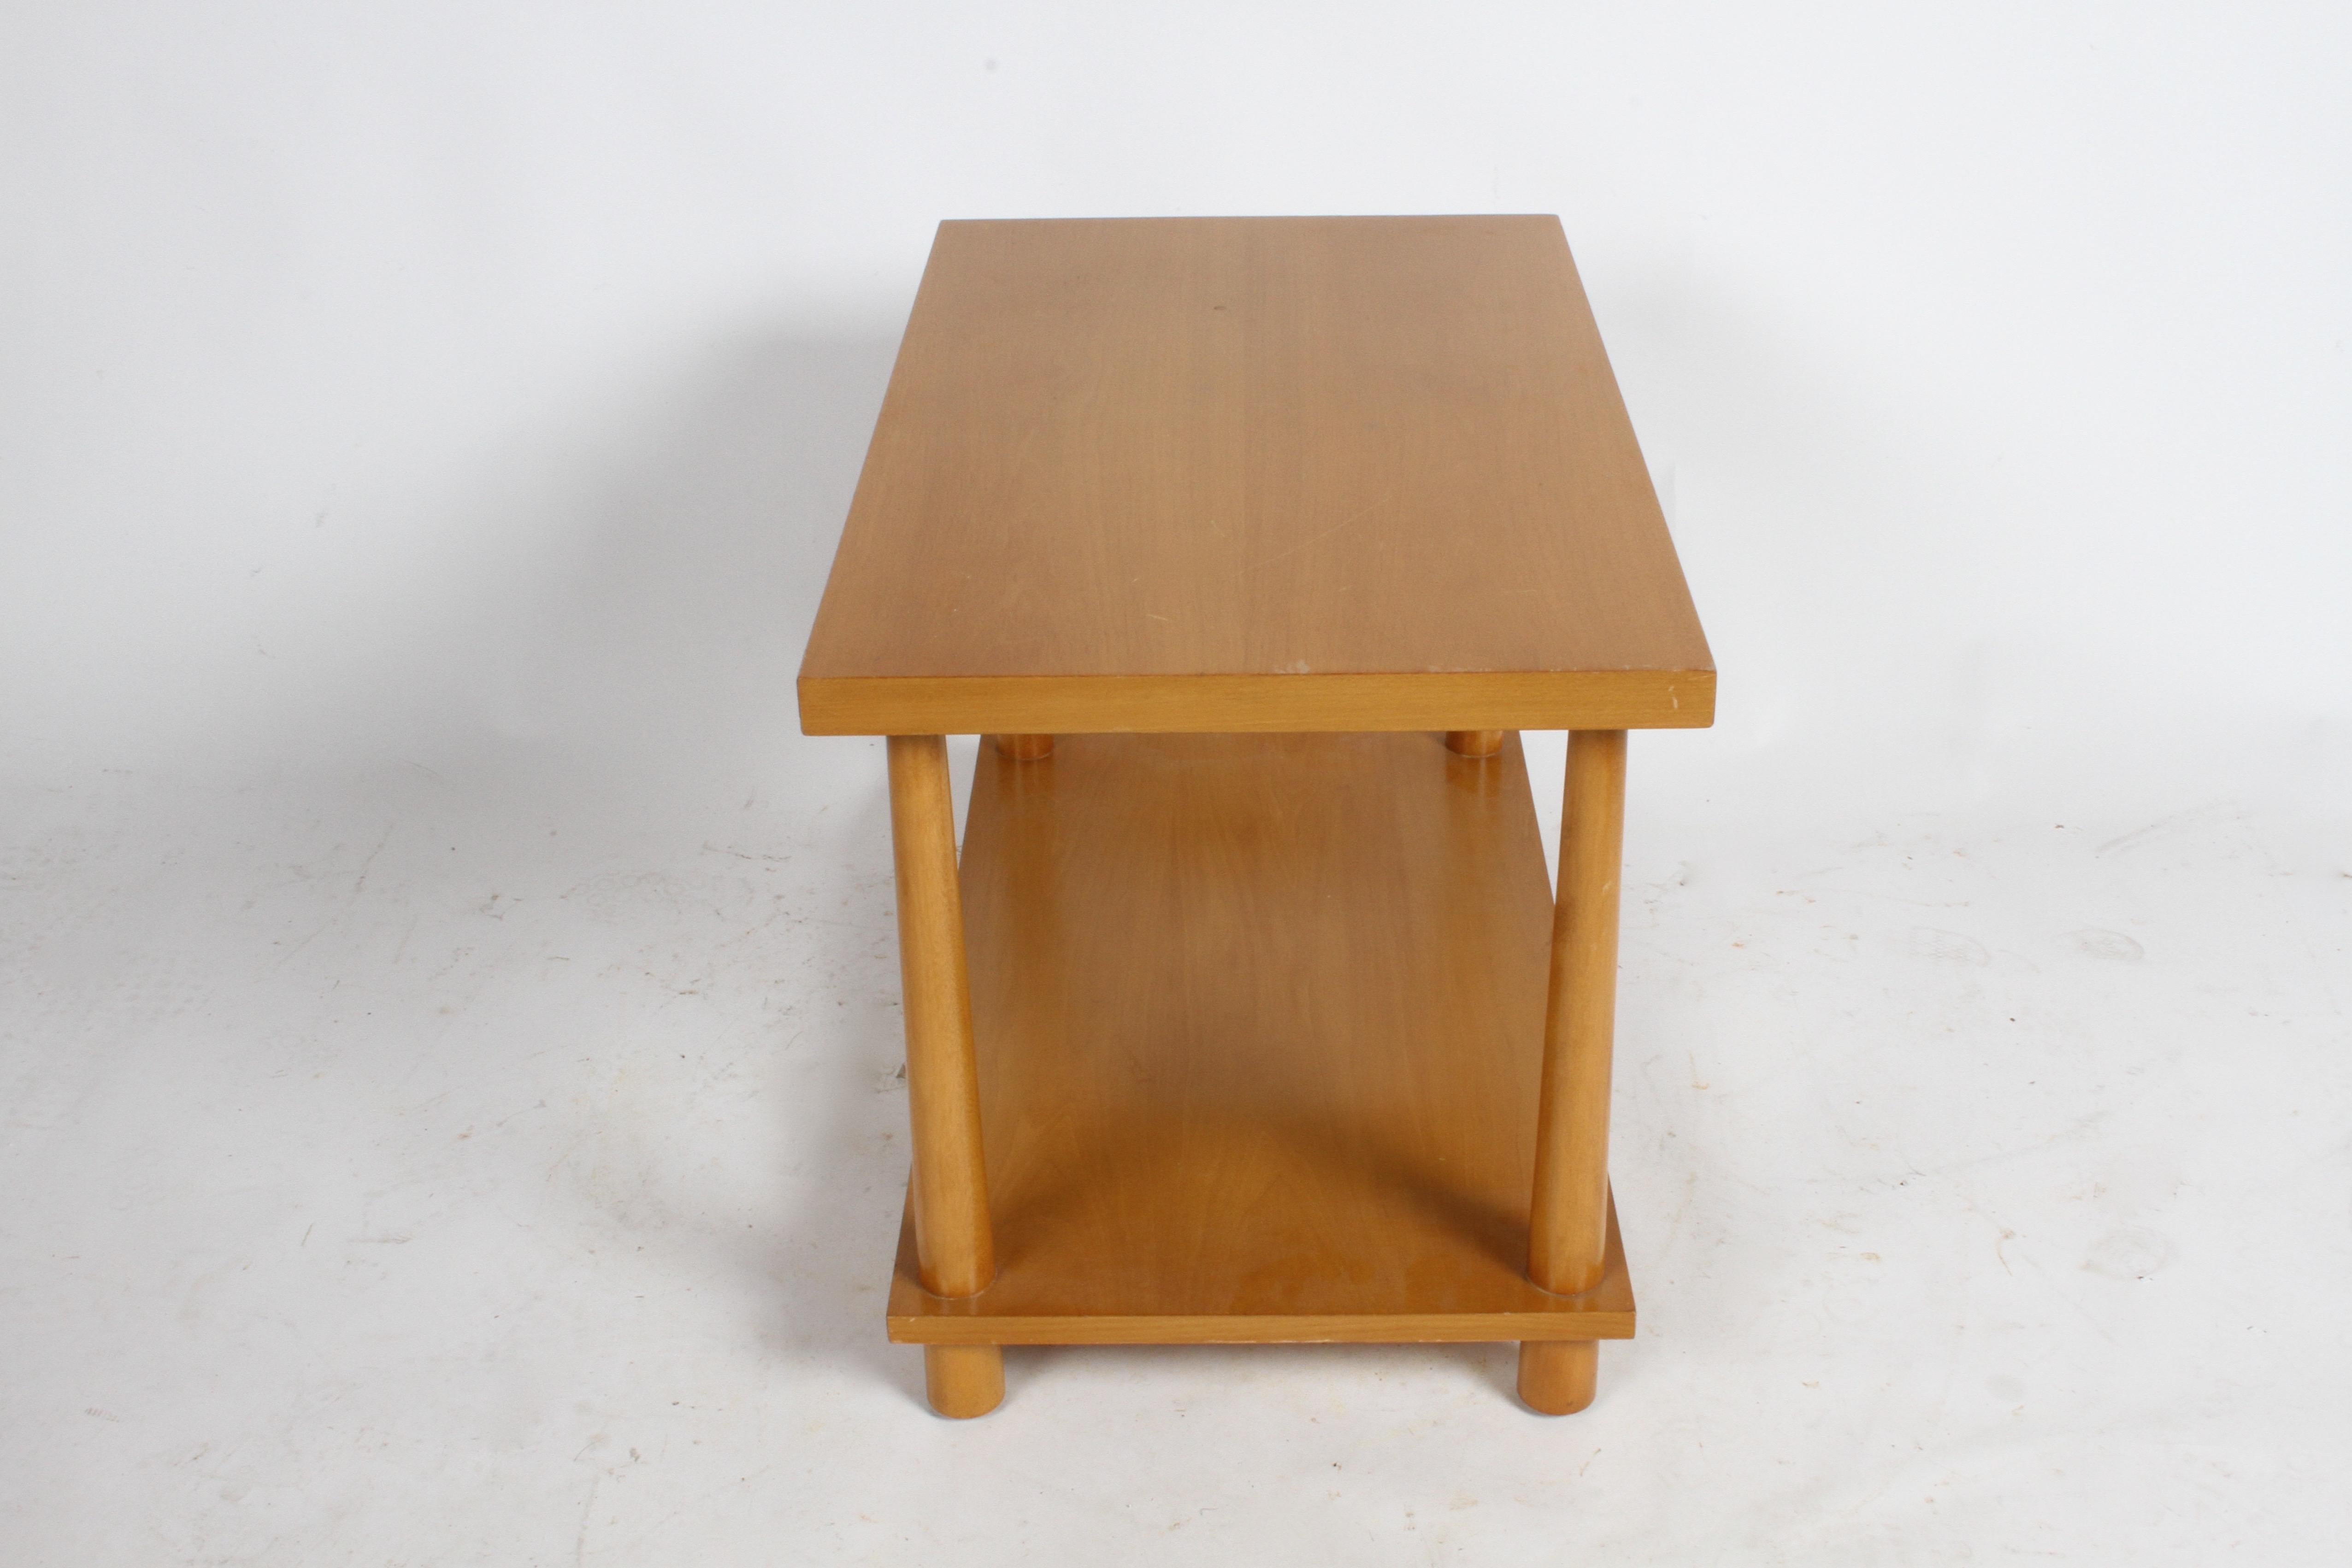 Pair of T.H. Robsjohn-Gibbings for Widdicomb with reverse tapered legs, shown in original finish. Included in price is refinishing of walnut, either as shown in lighter finish or in a darker espresso finish. Label on one table with model # 1643. Can